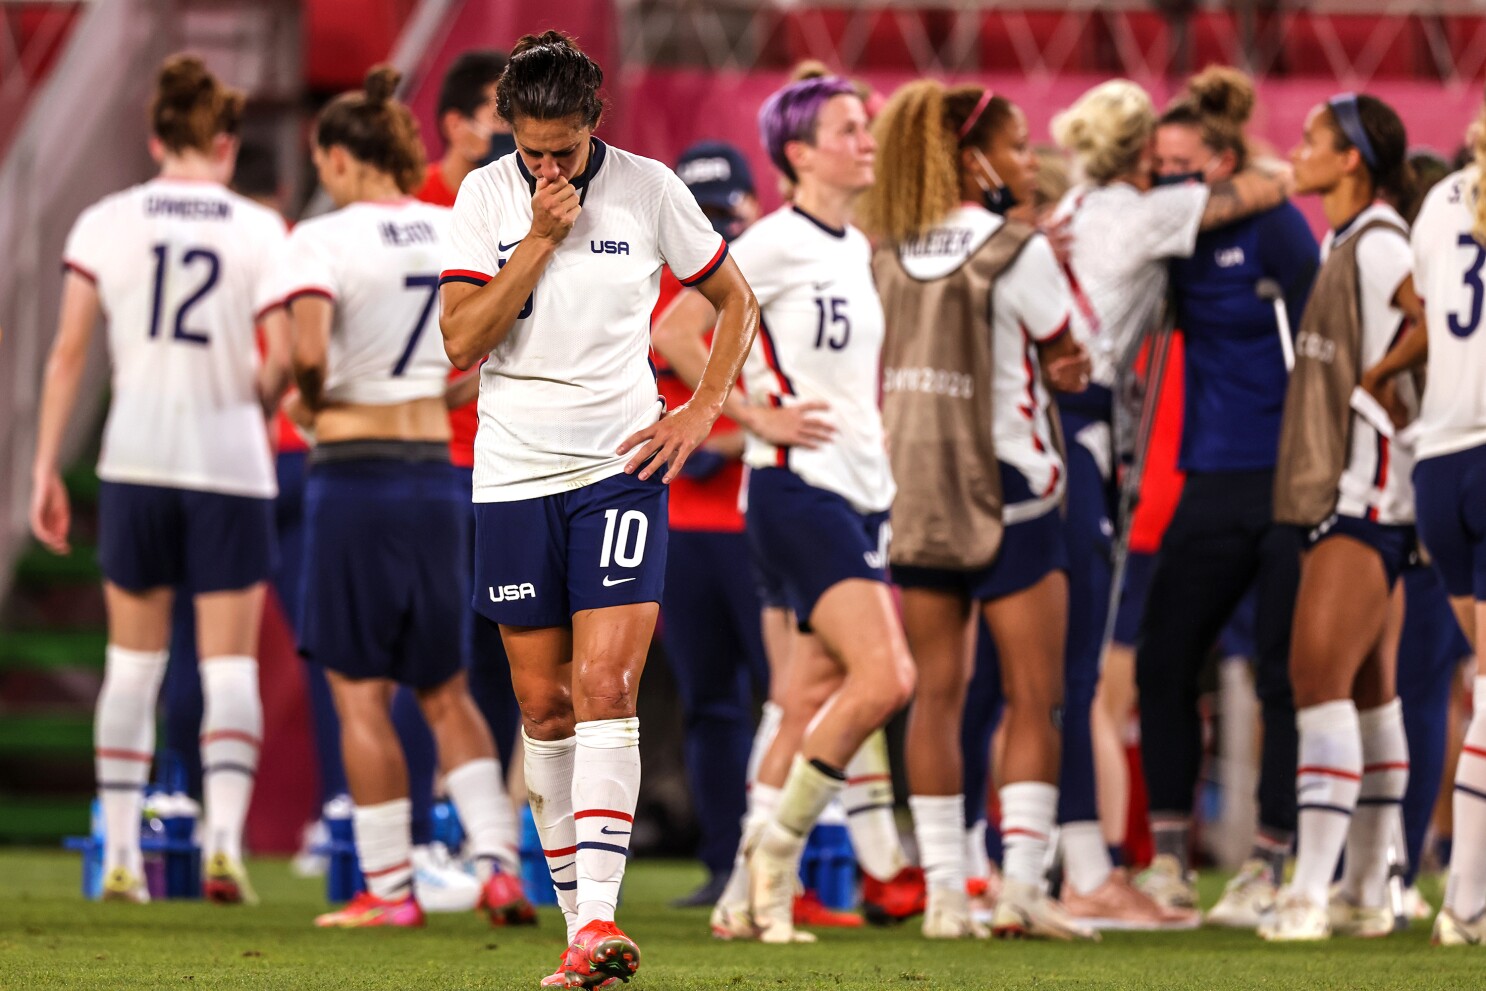 Tokyo Olympics Uswnt Eliminated From Gold Medal Contention Los Angeles Times